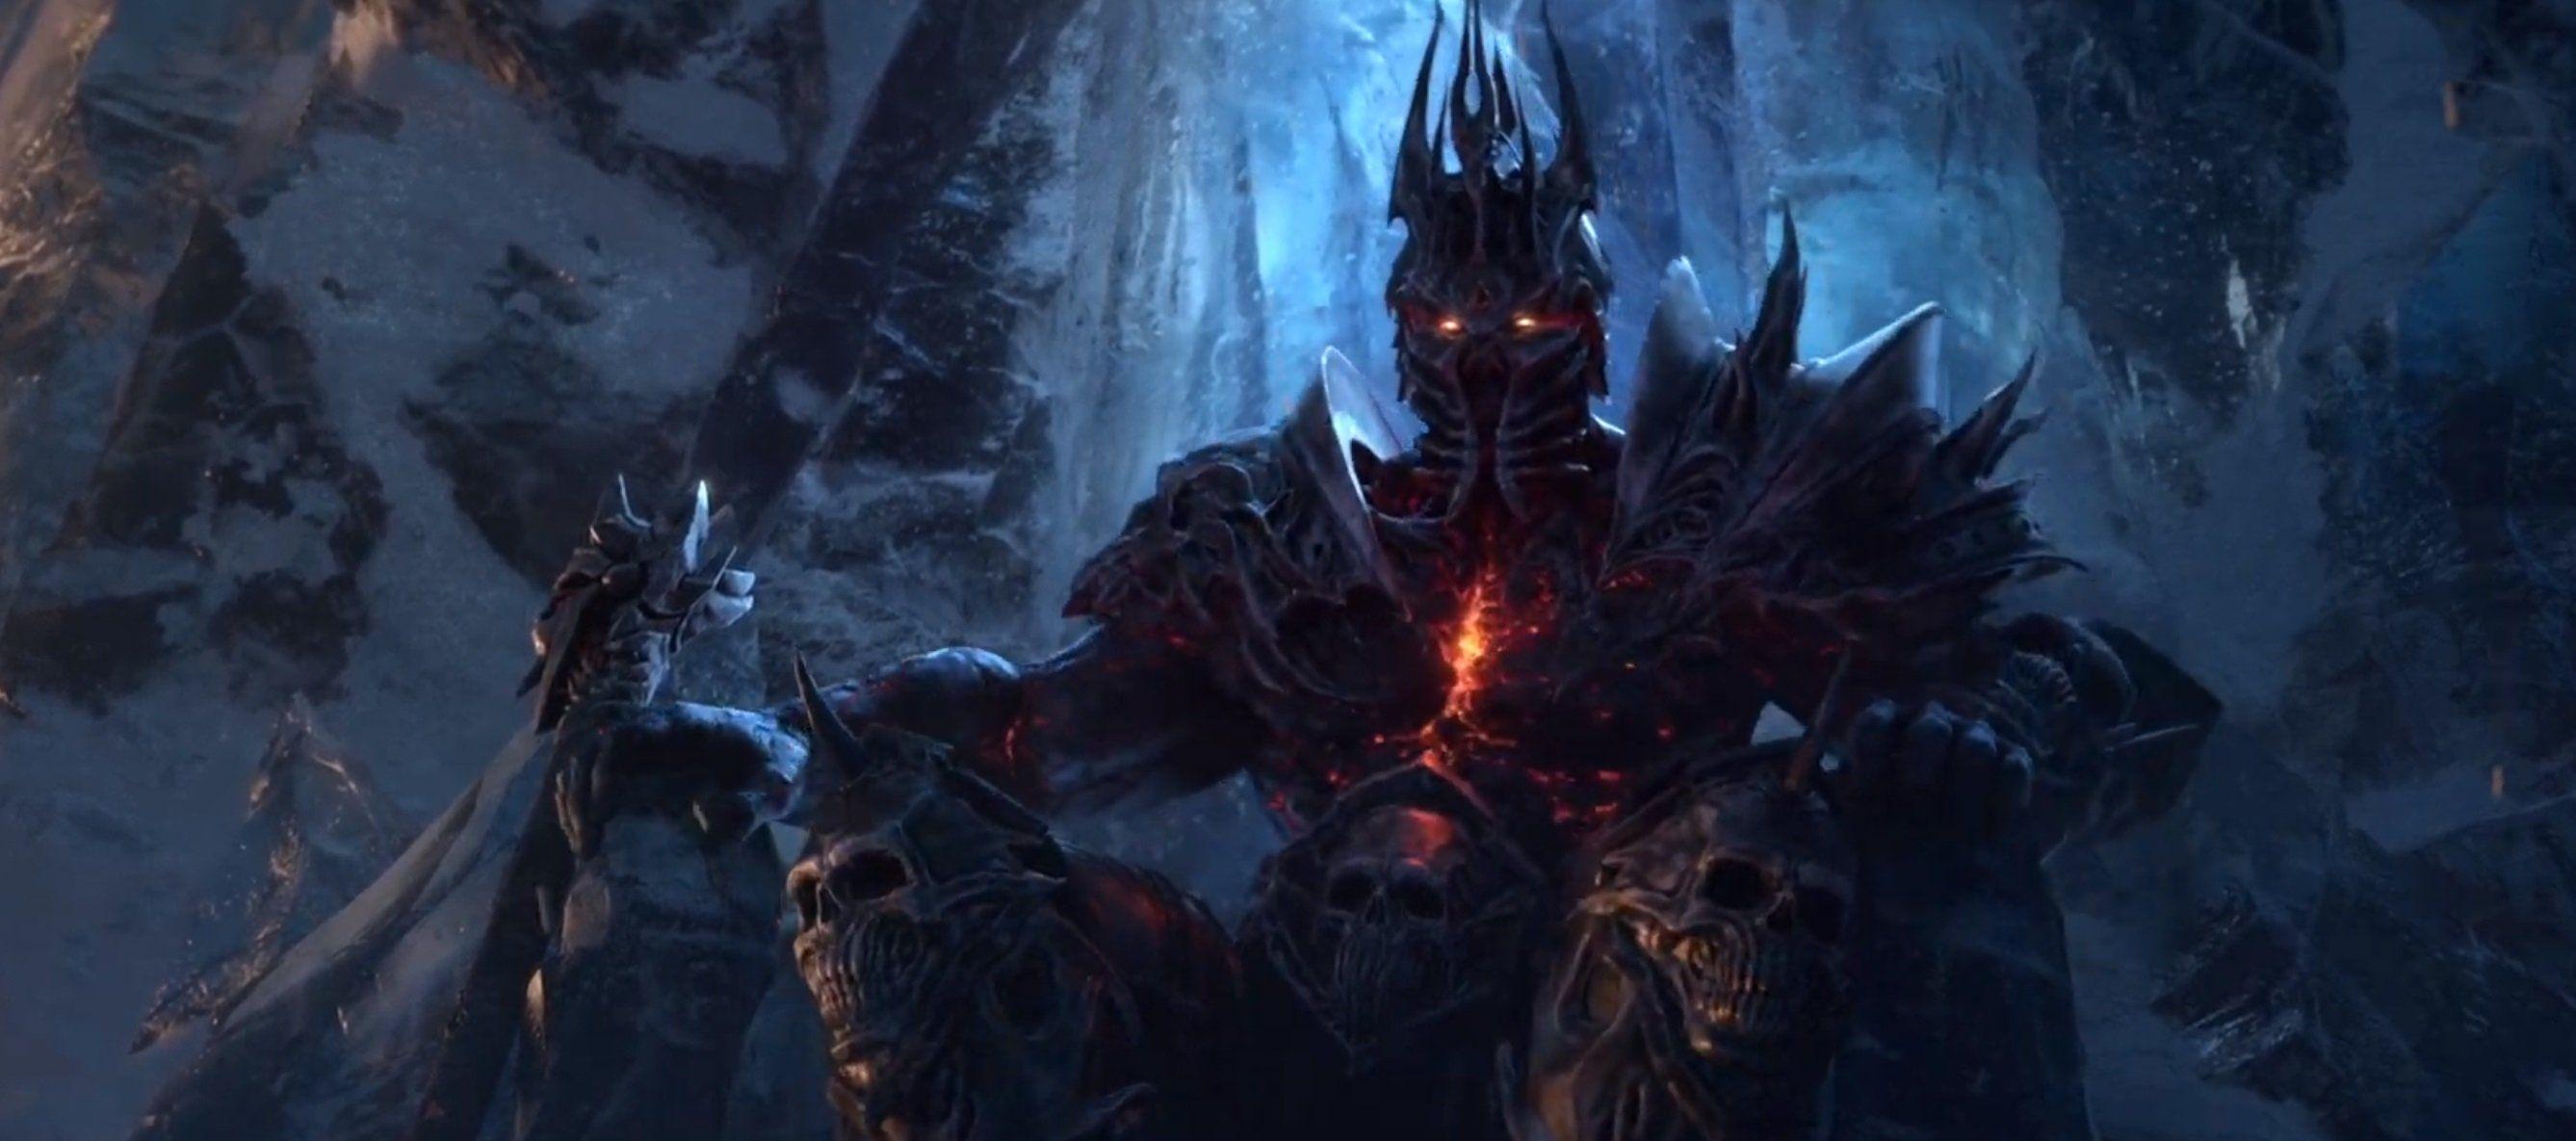 World of Warcraft: Shadowlands is completely overhauling WoW's leveling system. World of warcraft, Warcraft, Lich king